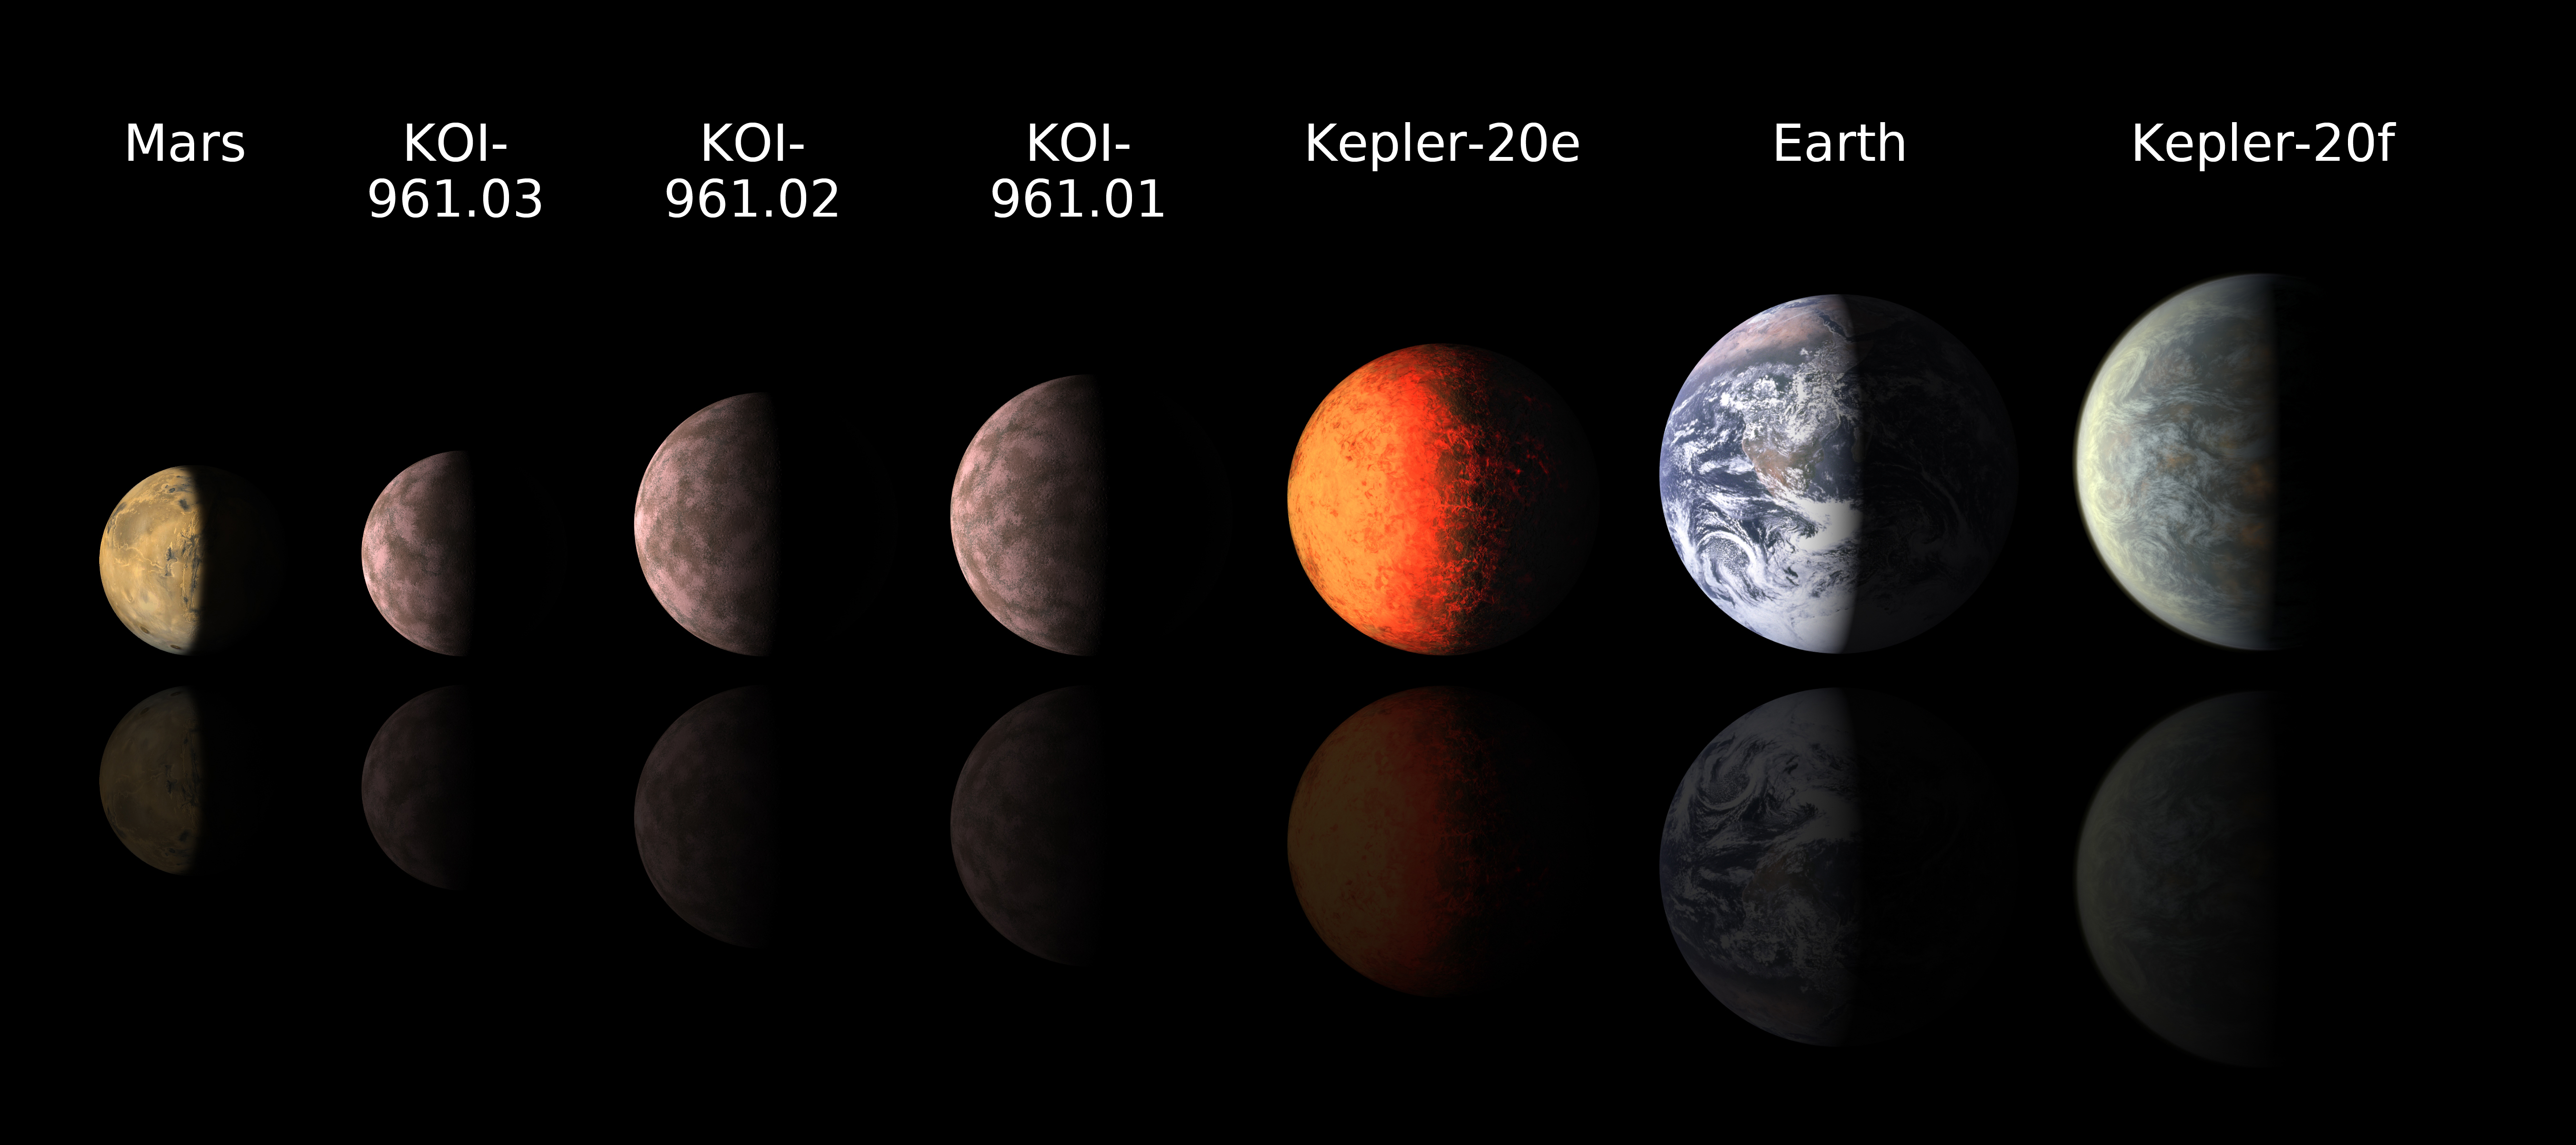 Smallest exoplanets compared to Earth and Mars